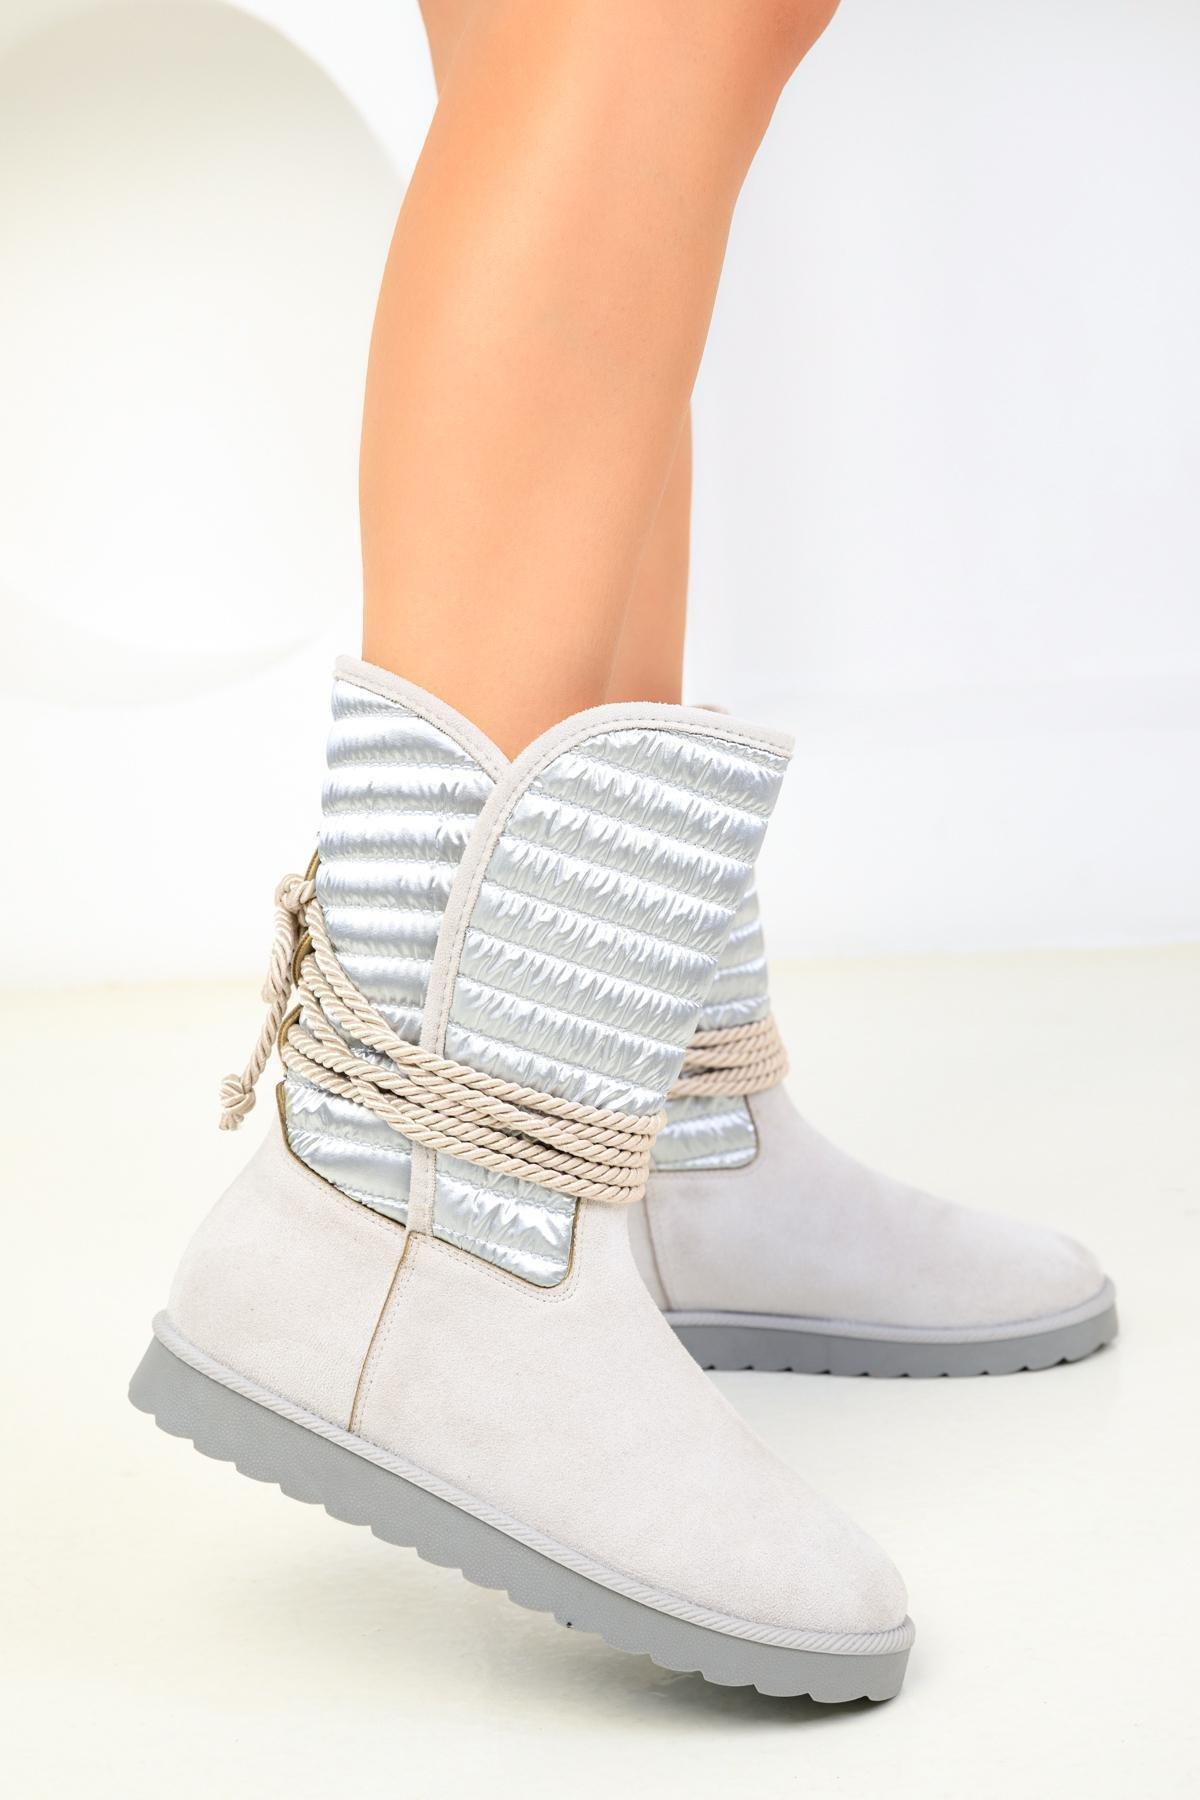 SOHO - Grey Suede Parachute Boots